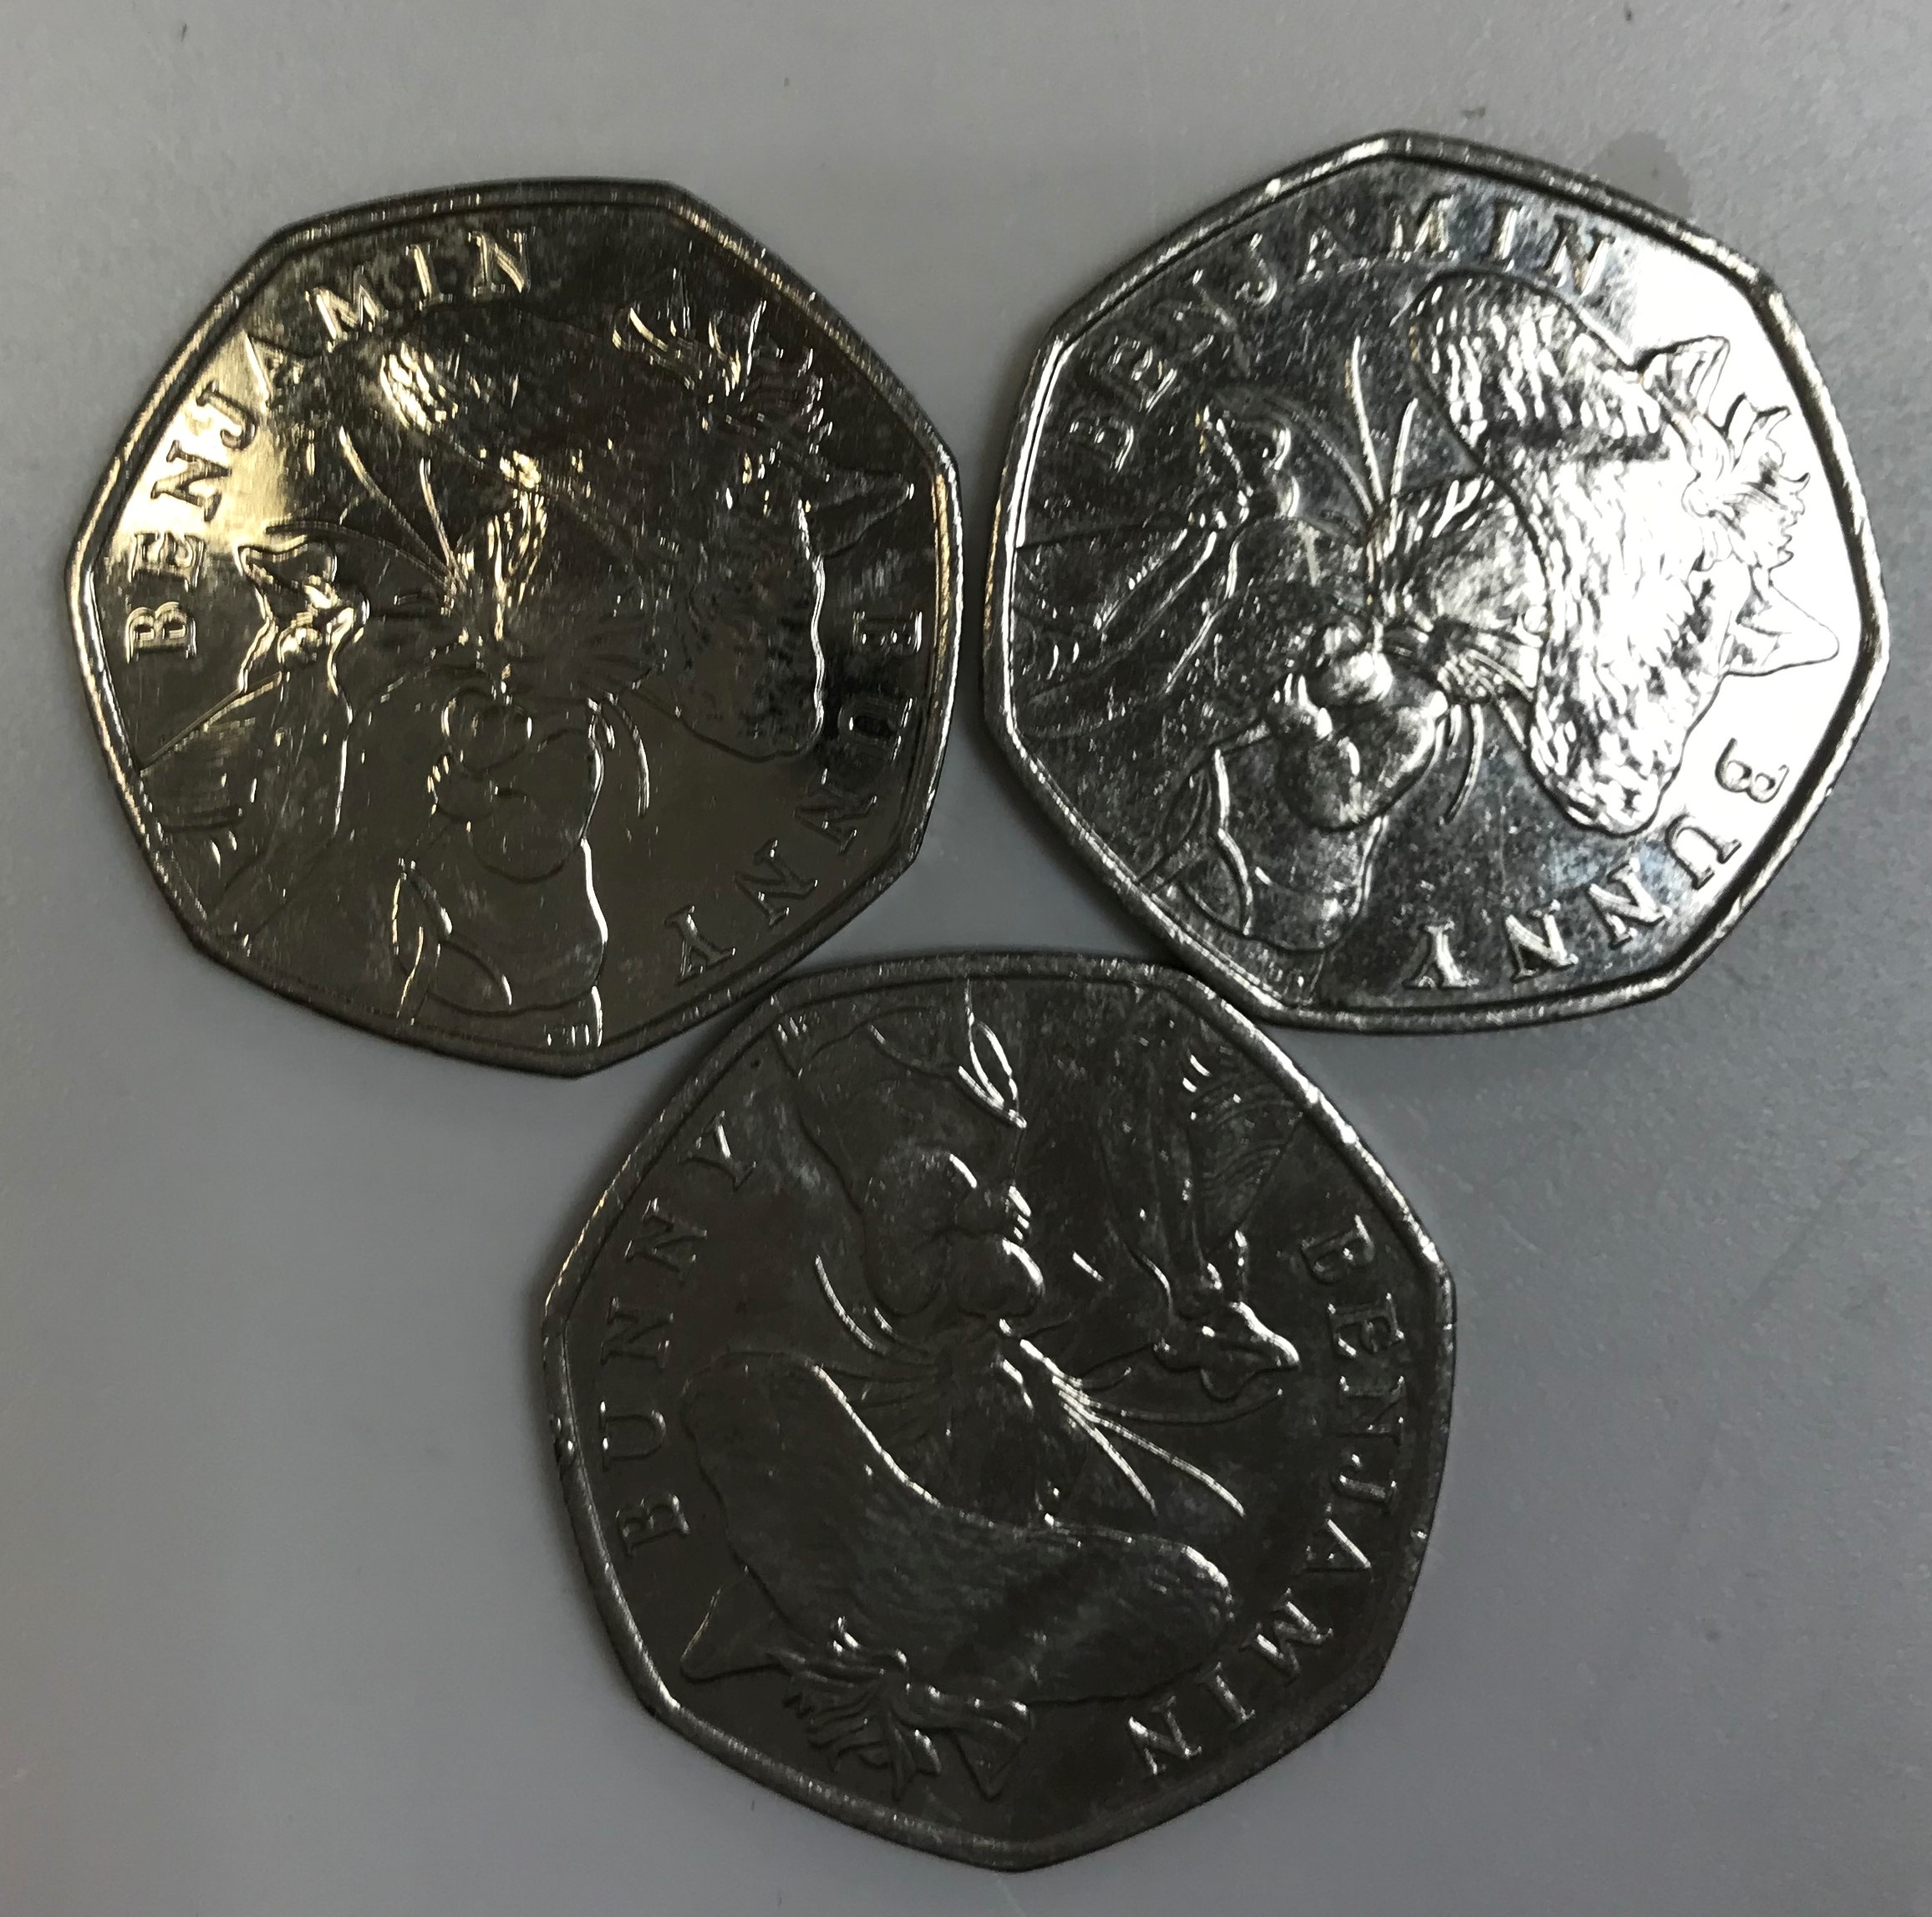 A collection of Beatrix Potter Commemorative 50 p pieces including “Benjamin Bunny” 2017 (x 15), - Image 2 of 3